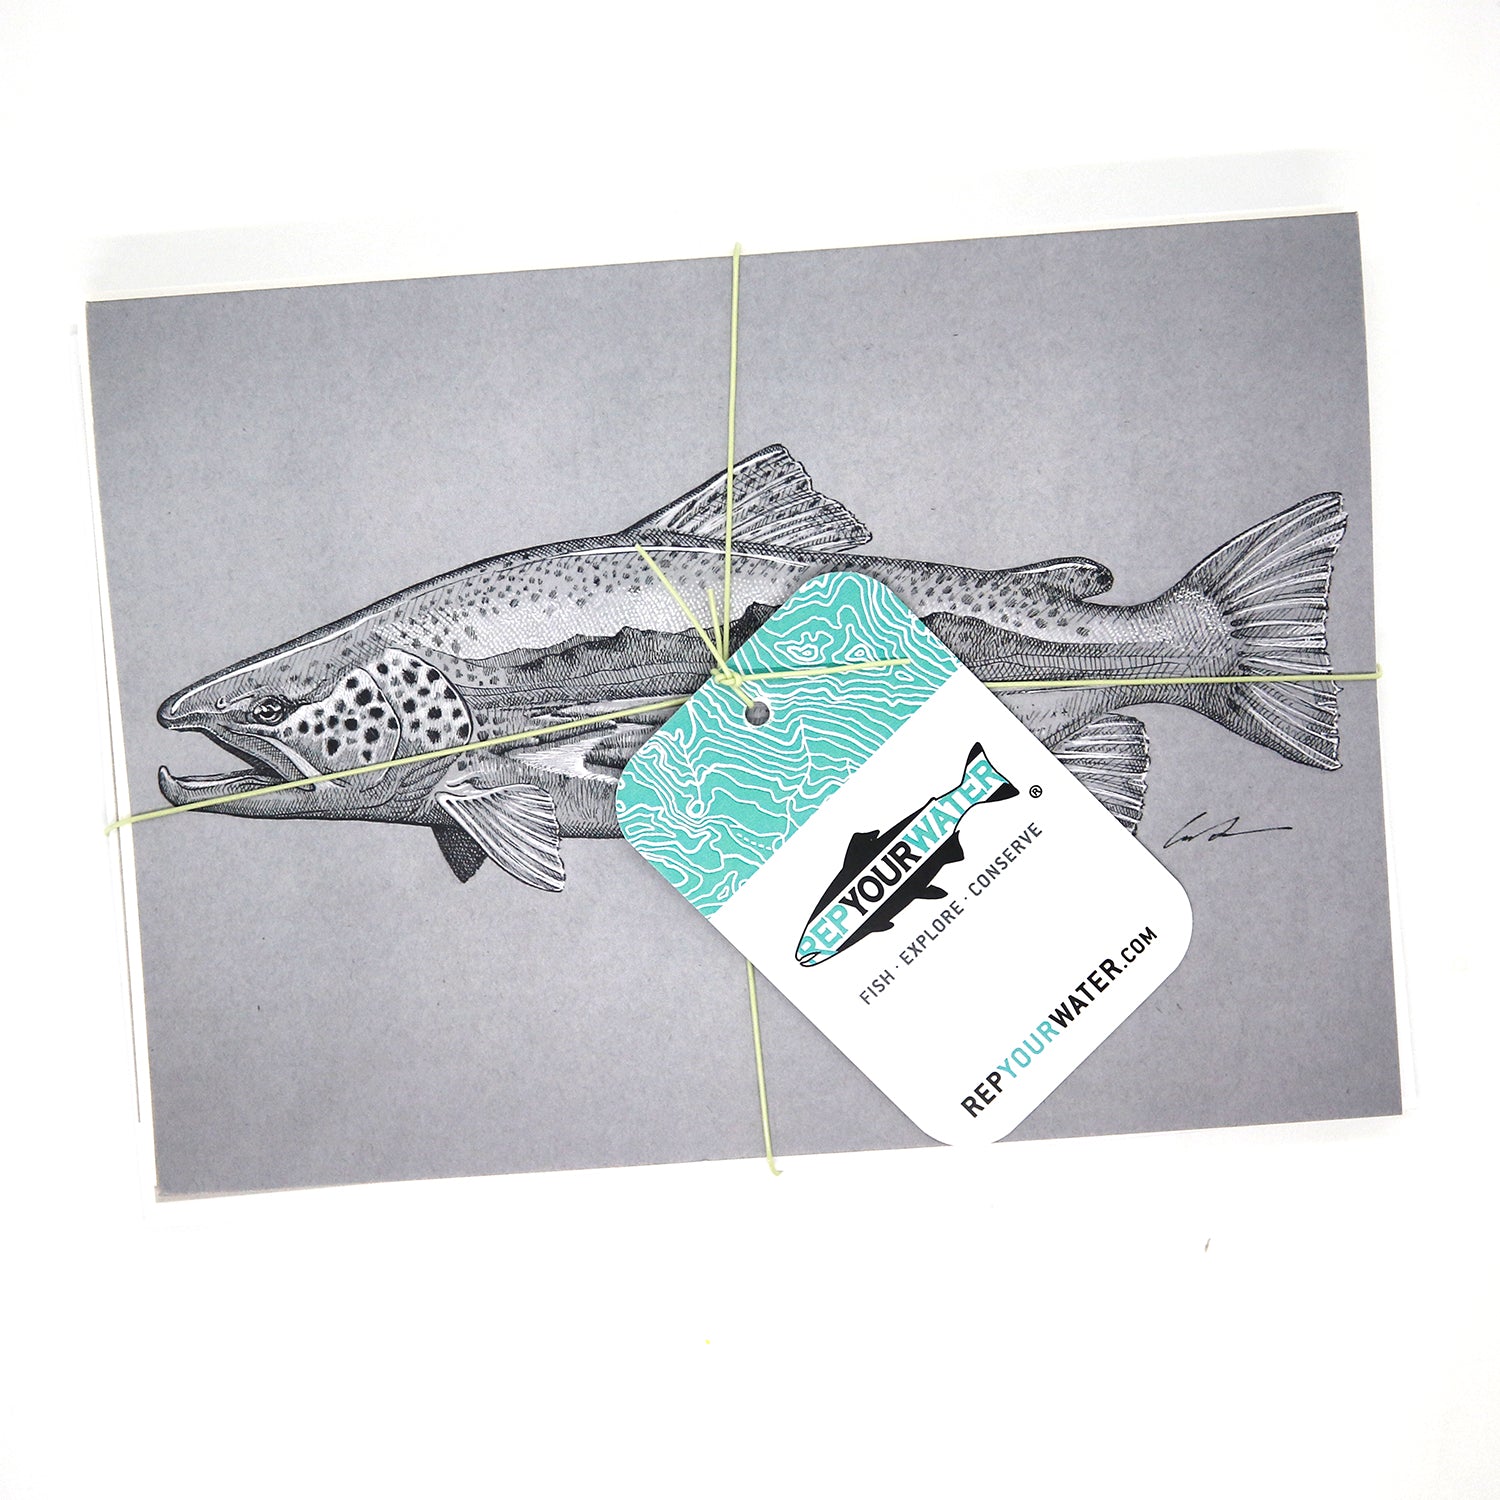 One stack of greeting cards with the same hangtag in the first image.  This only shows a brown trout with a spring creek and mountain drawn inside it as agreeting card.